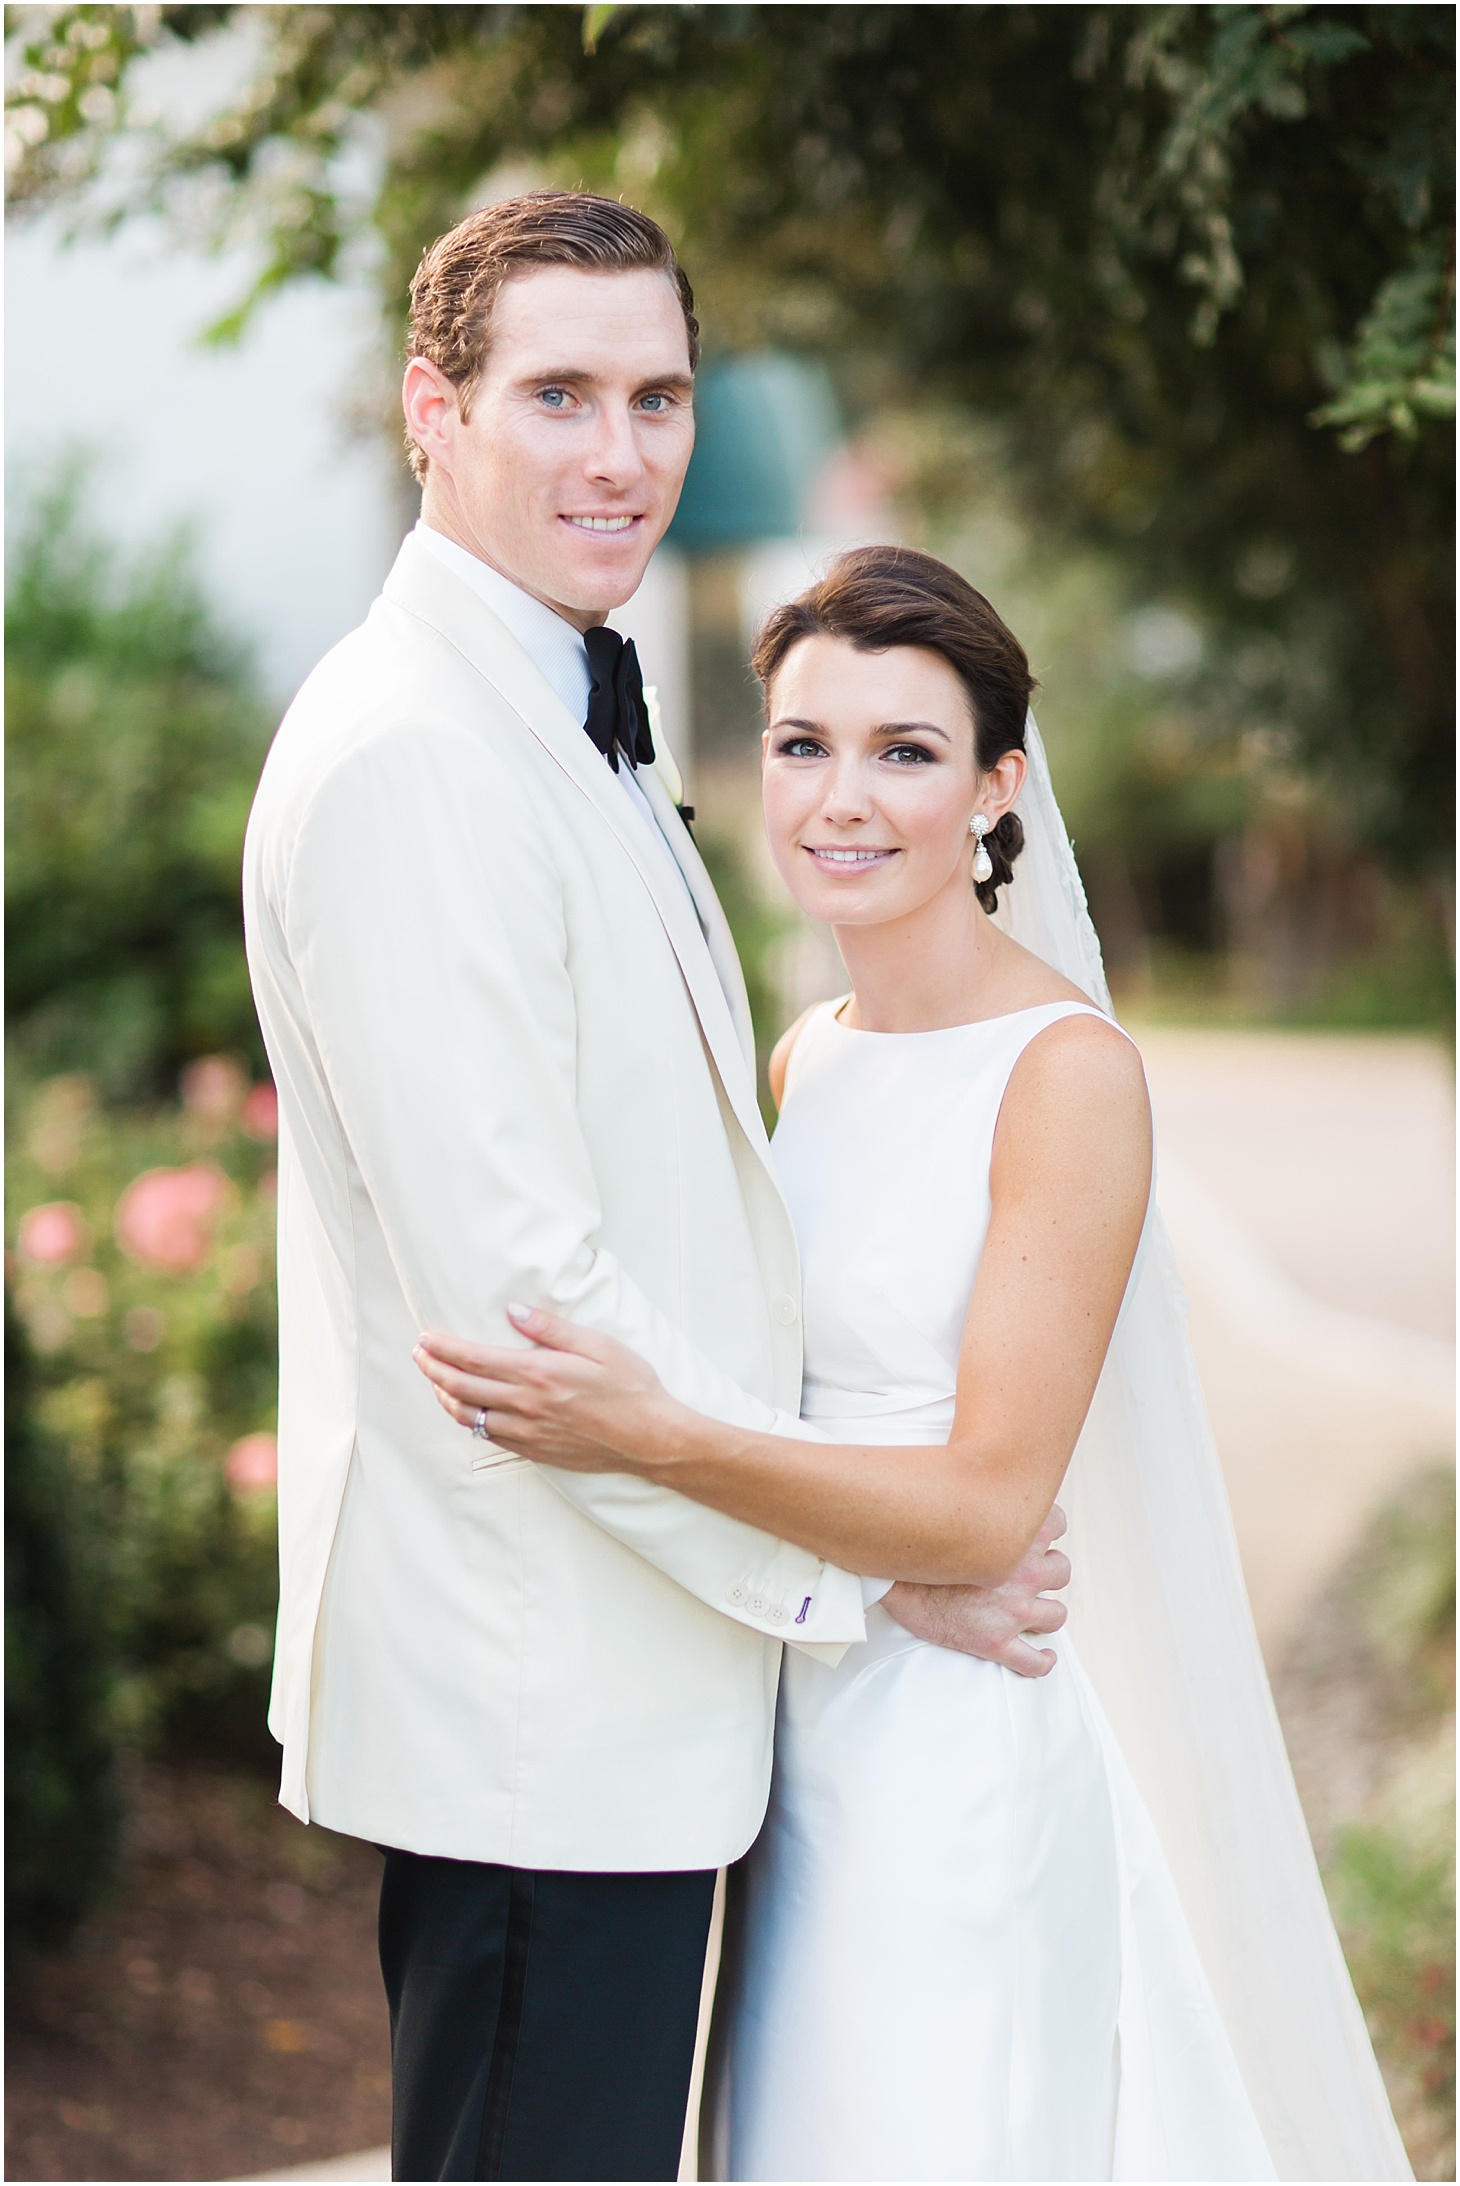 Bridal Portrait at at the Columbia Country Club | Wedding Ceremony at Cathedral of St. Matthew the Apostle | Classy October Wedding in Washington, D.C. | Sarah Bradshaw Photography